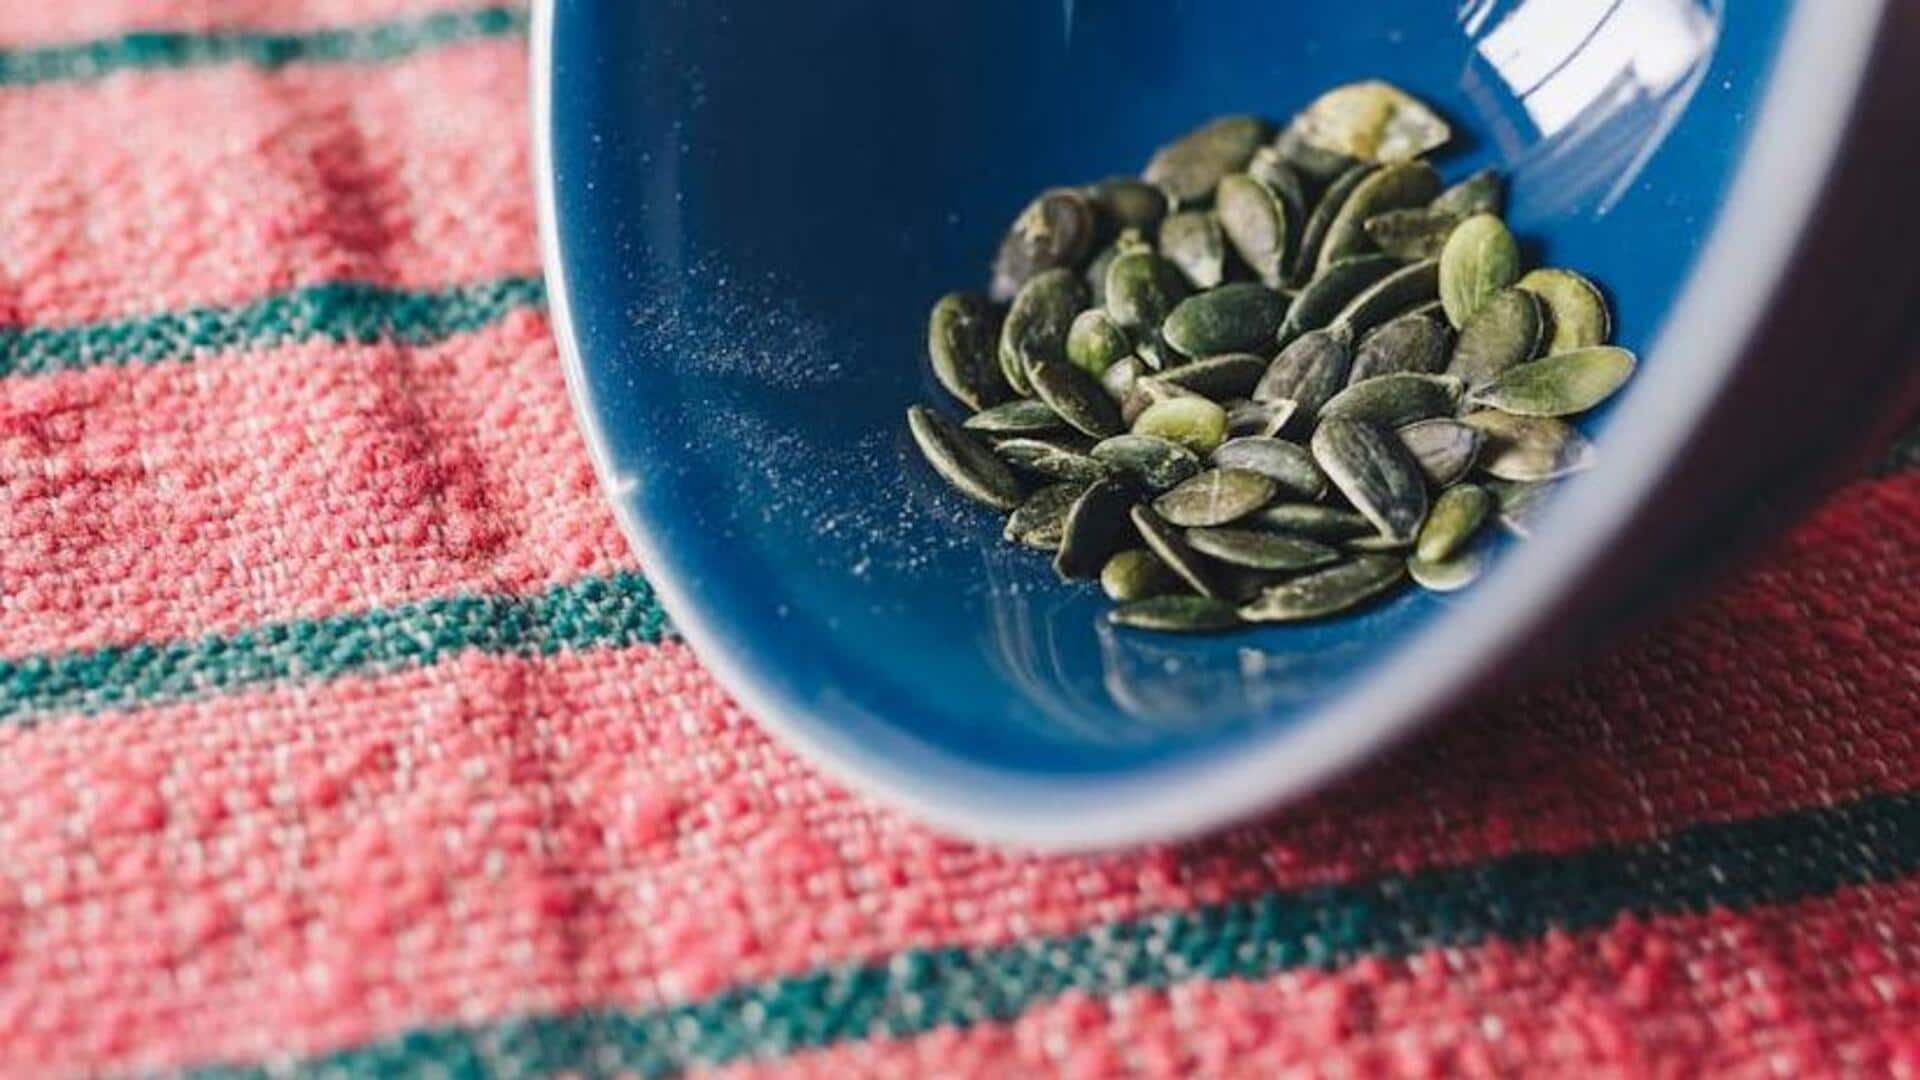 Boost your calcium intake with these wholesome seeds